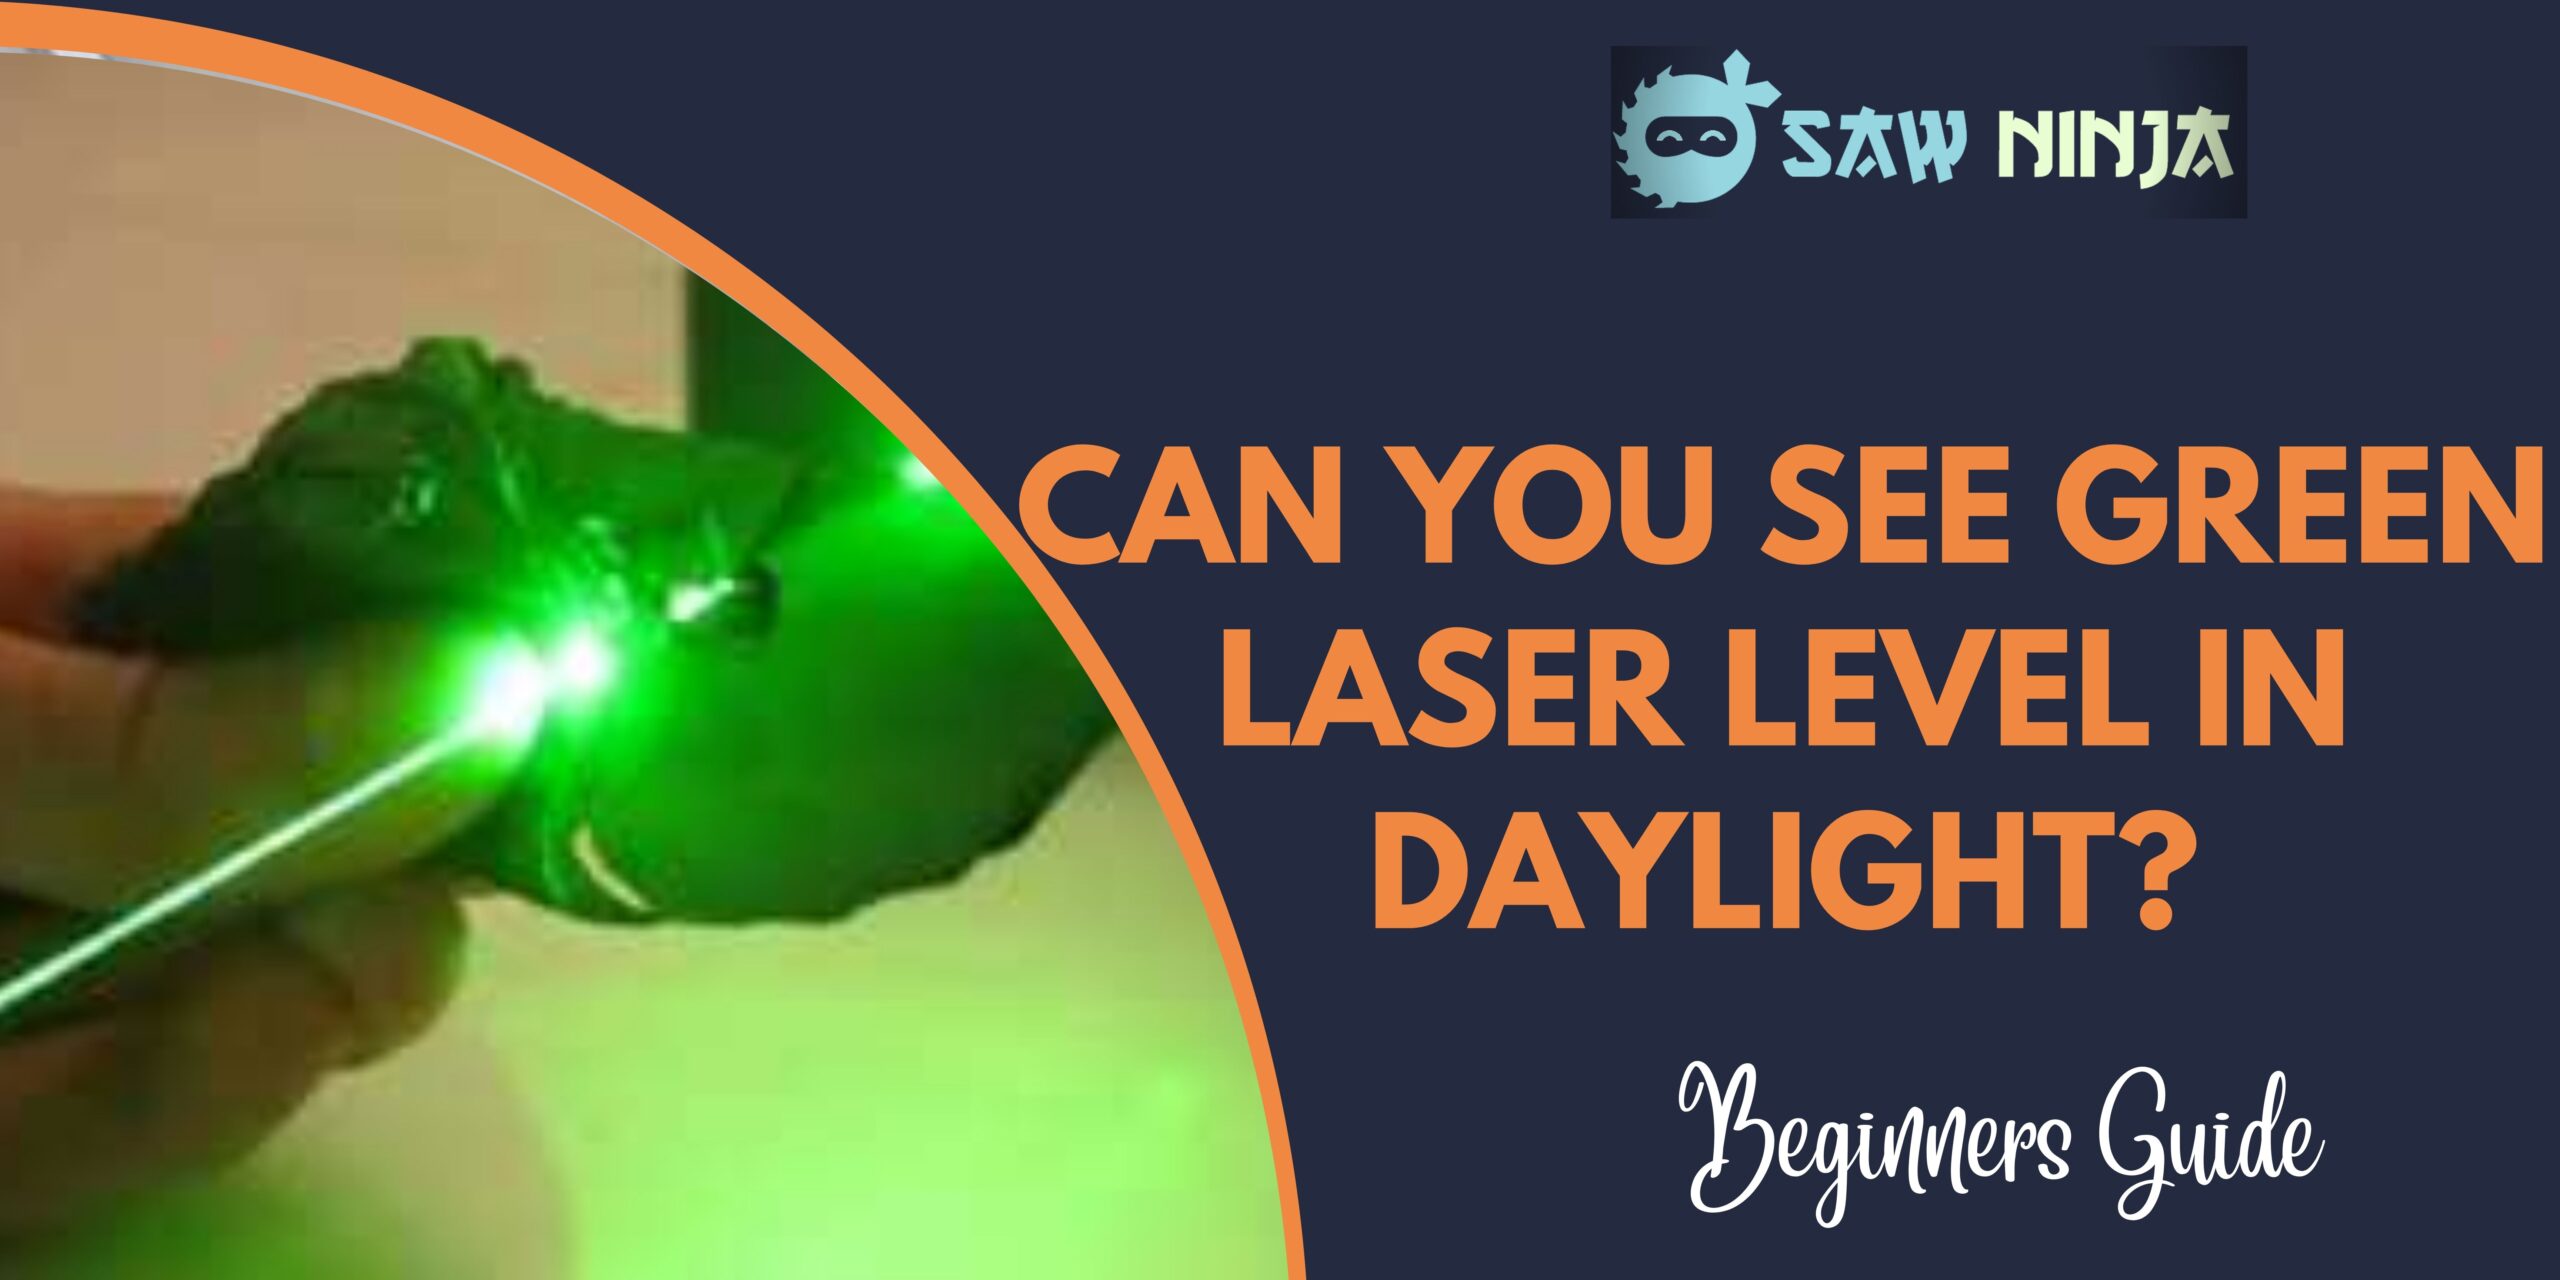 Can You See Green Laser Level in Daylight